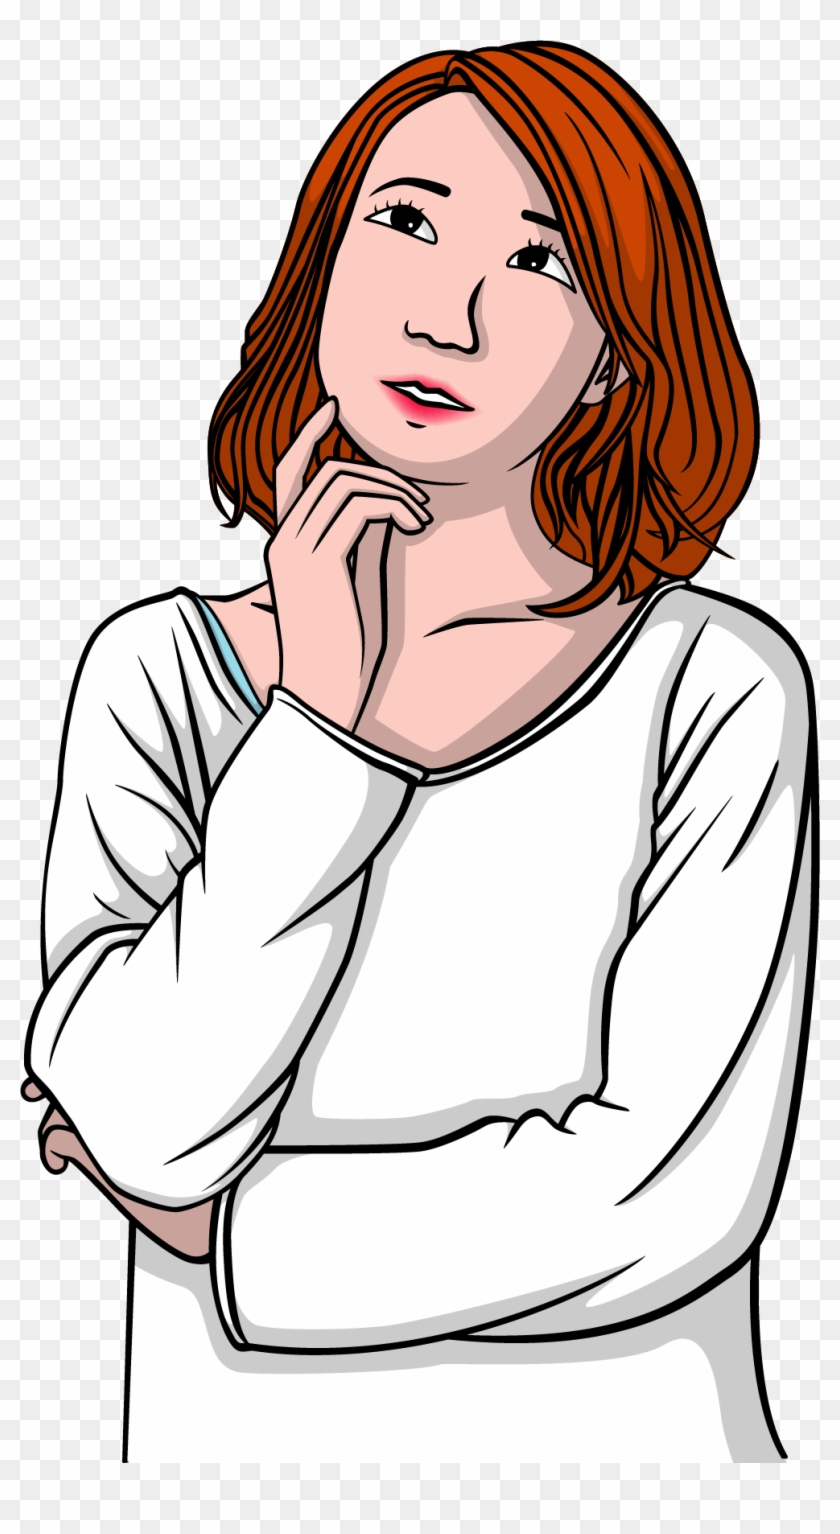 Woman Thought Girl Clip Art - Thinking Girl Cartoon Image Png #371429